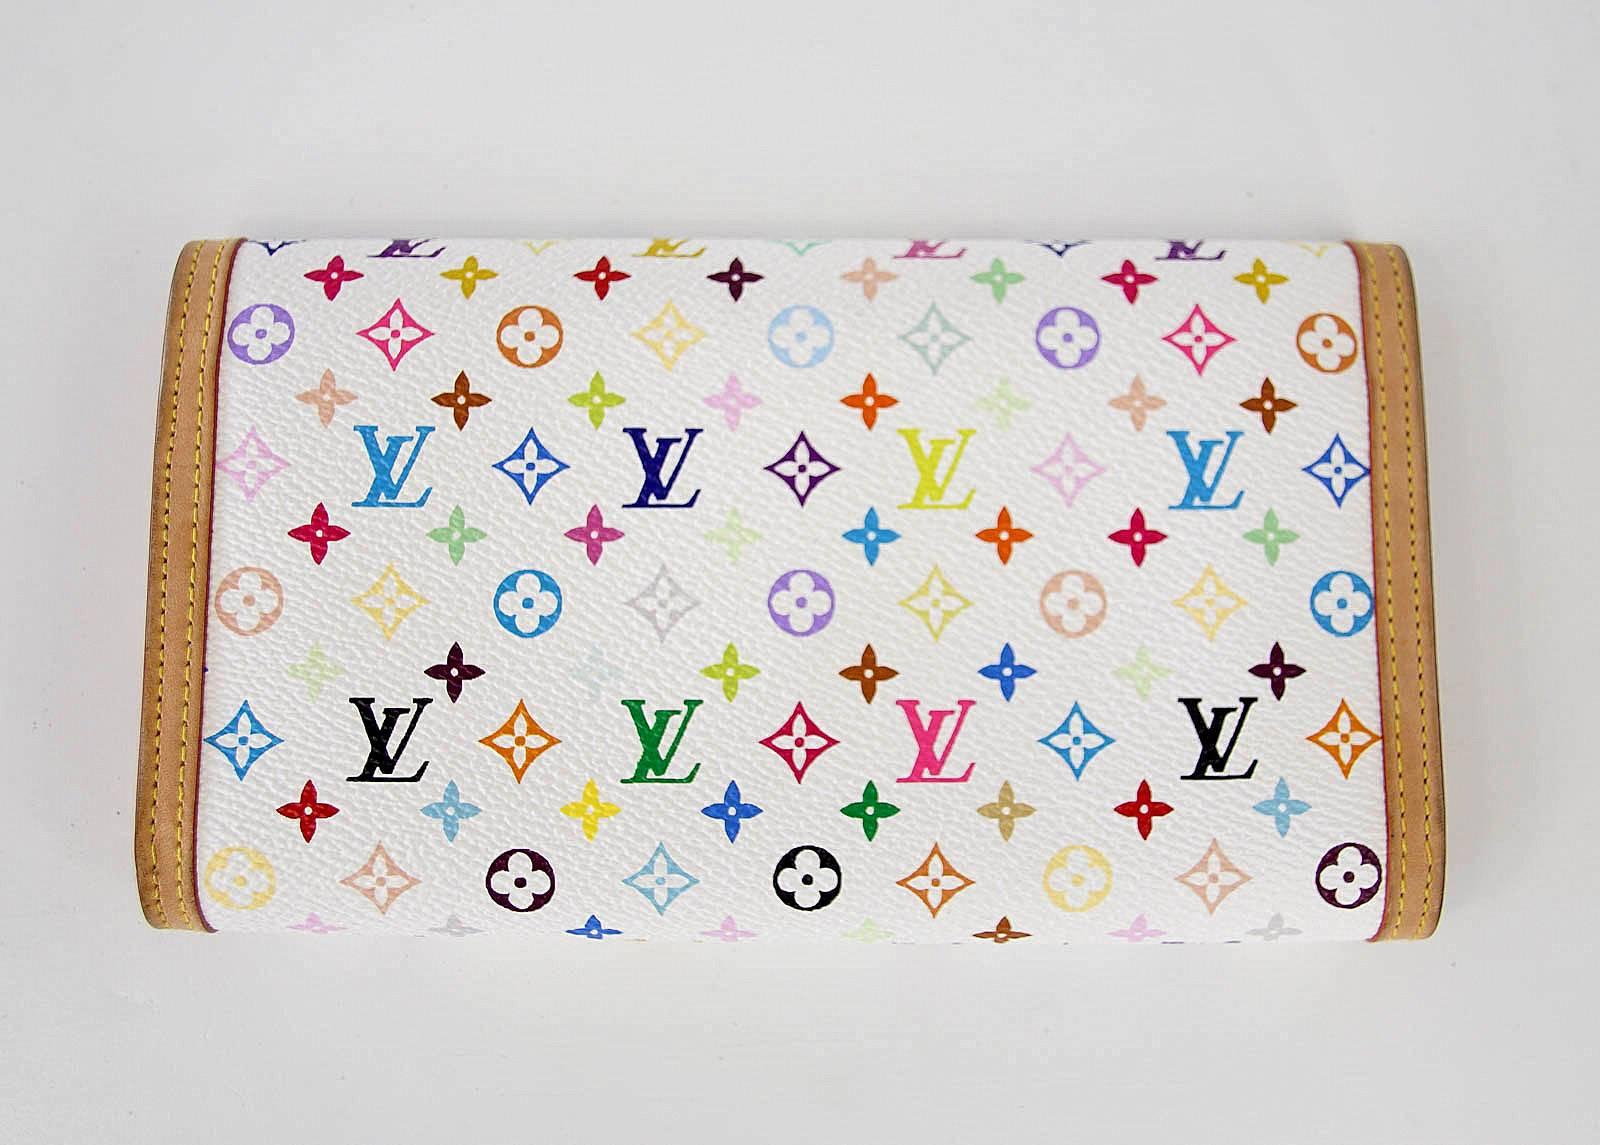 Guaranteed authentic Louis Vuitton white Murakami Porte Tresor International wallet.
4 credit card slots.
Checkbook slot and change purse.
See separate listing for matching Alma bag in white Murakami. 
final sale

WALLET MEASURES:
LENGTH  7.5"